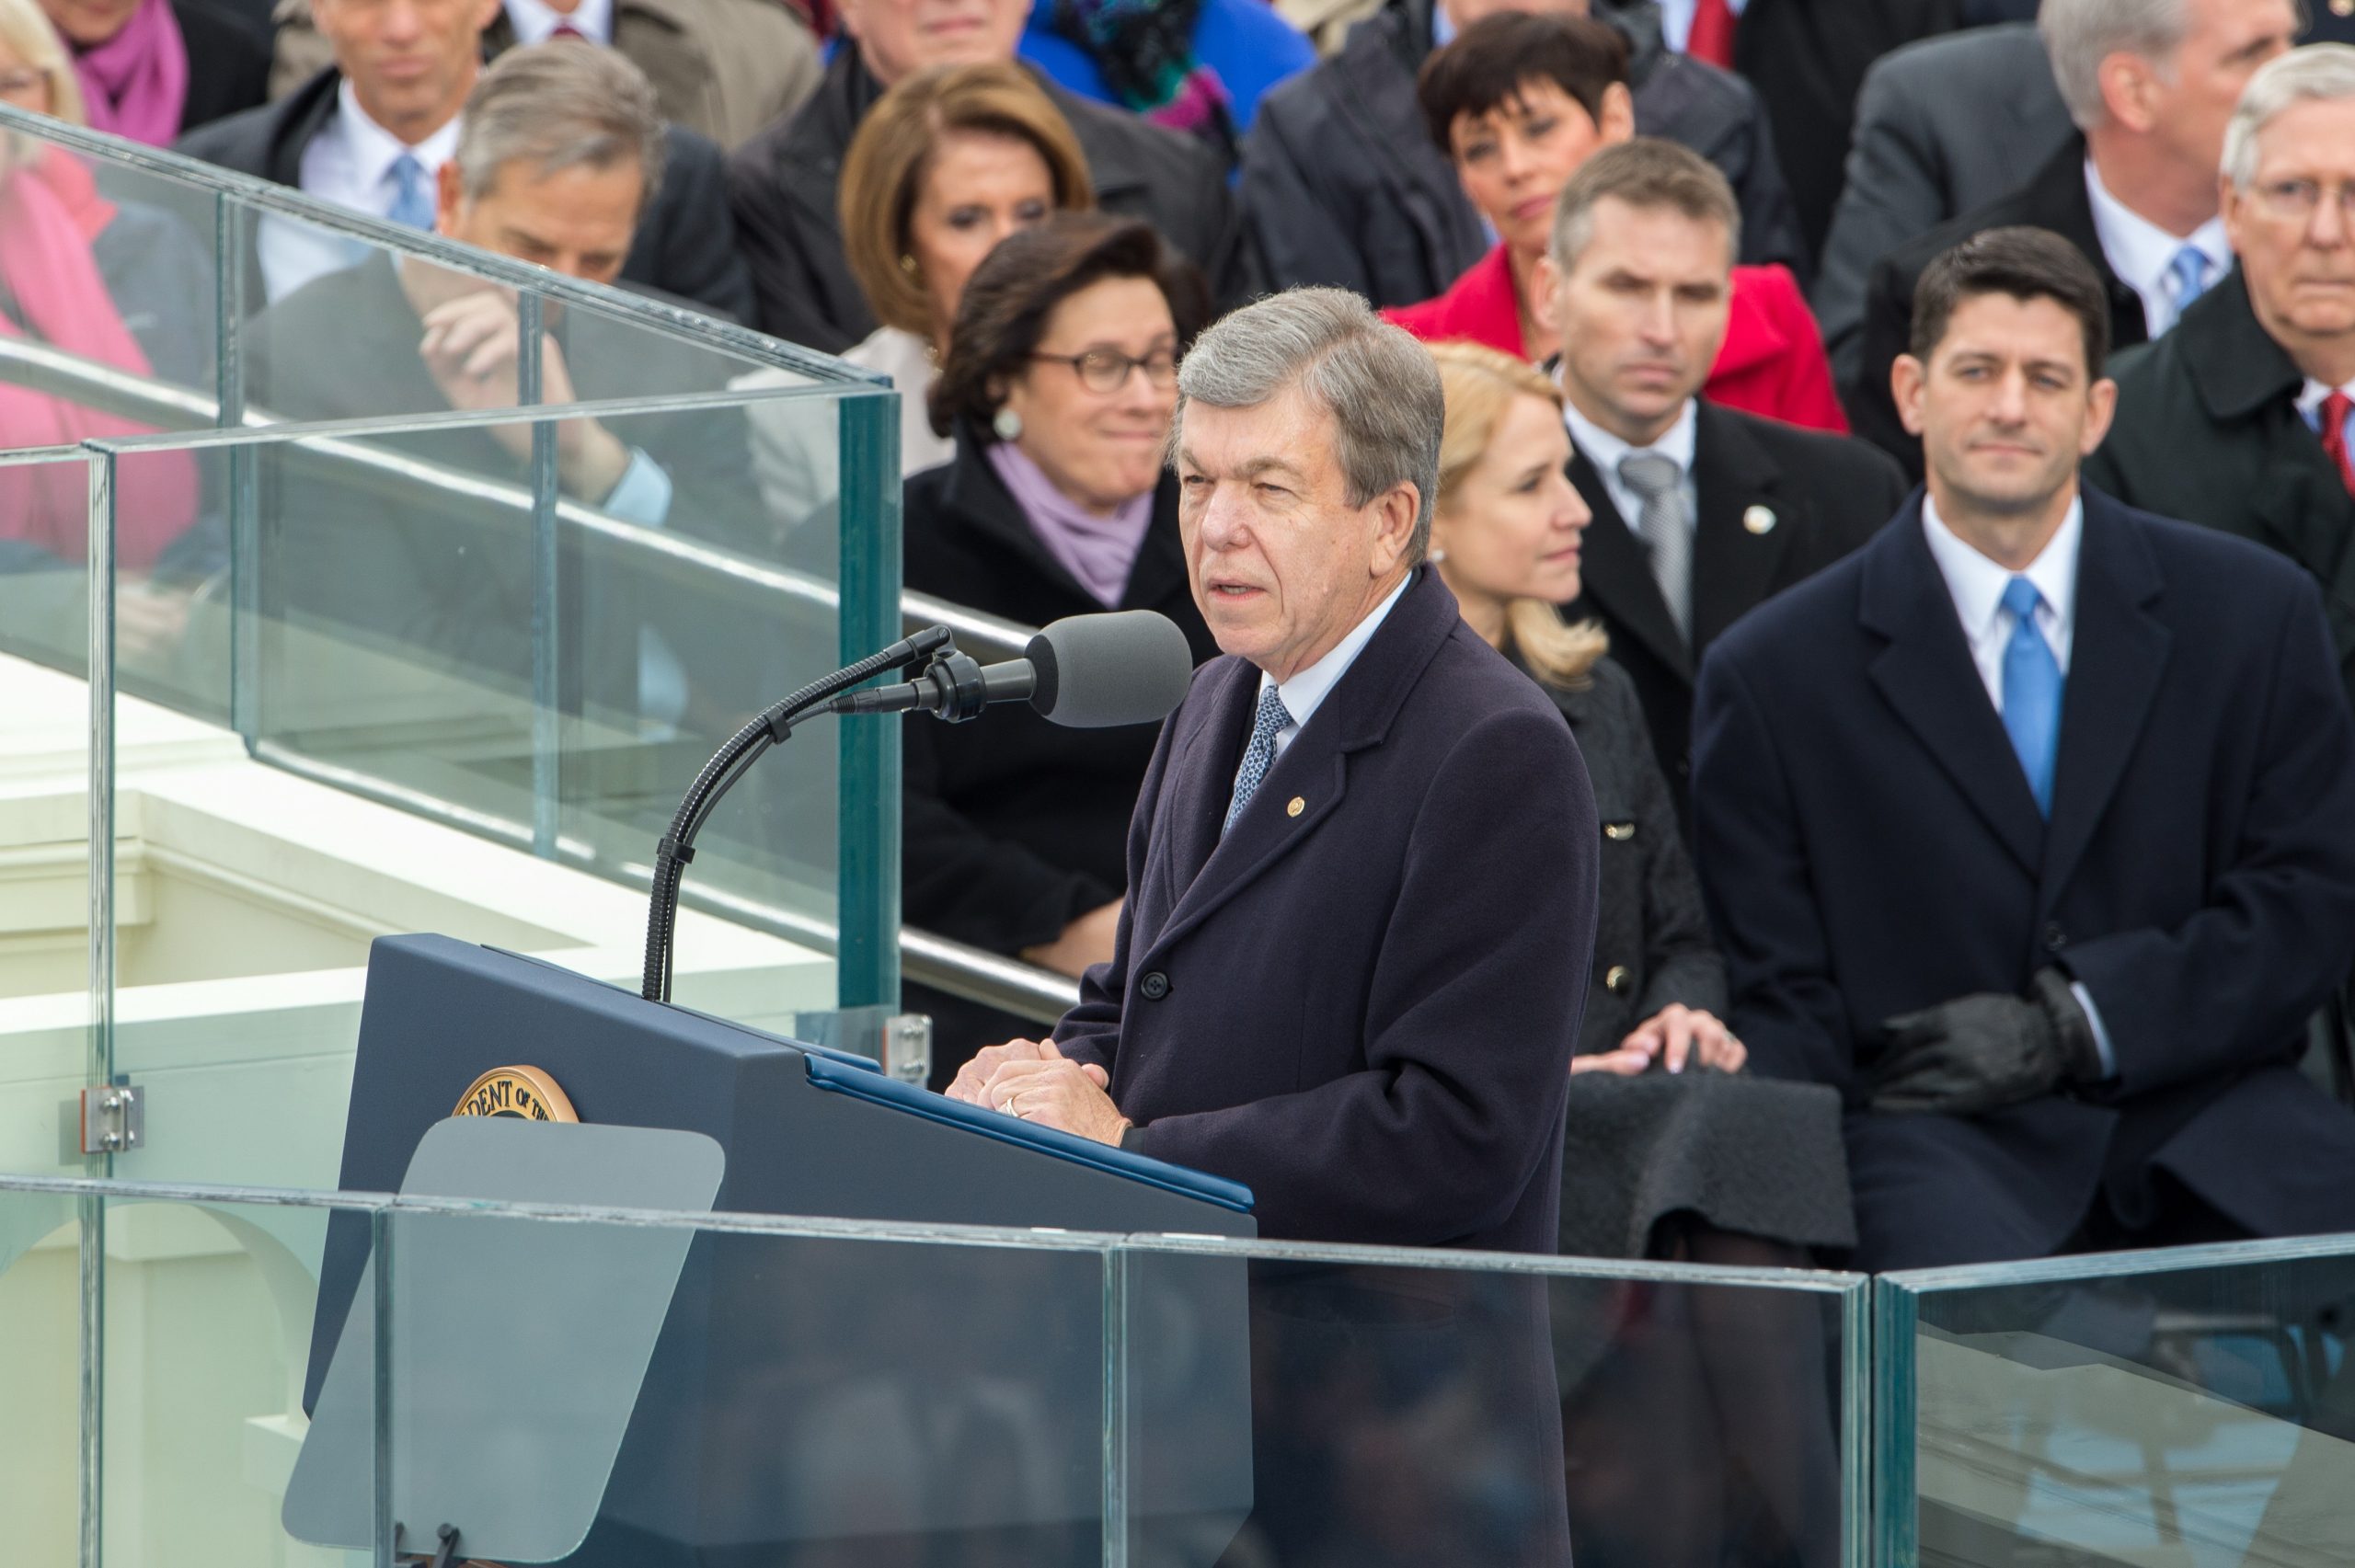 58th Inaugural Ceremonies Call To Order and Welcoming Remarks The Honorable Roy Blunt